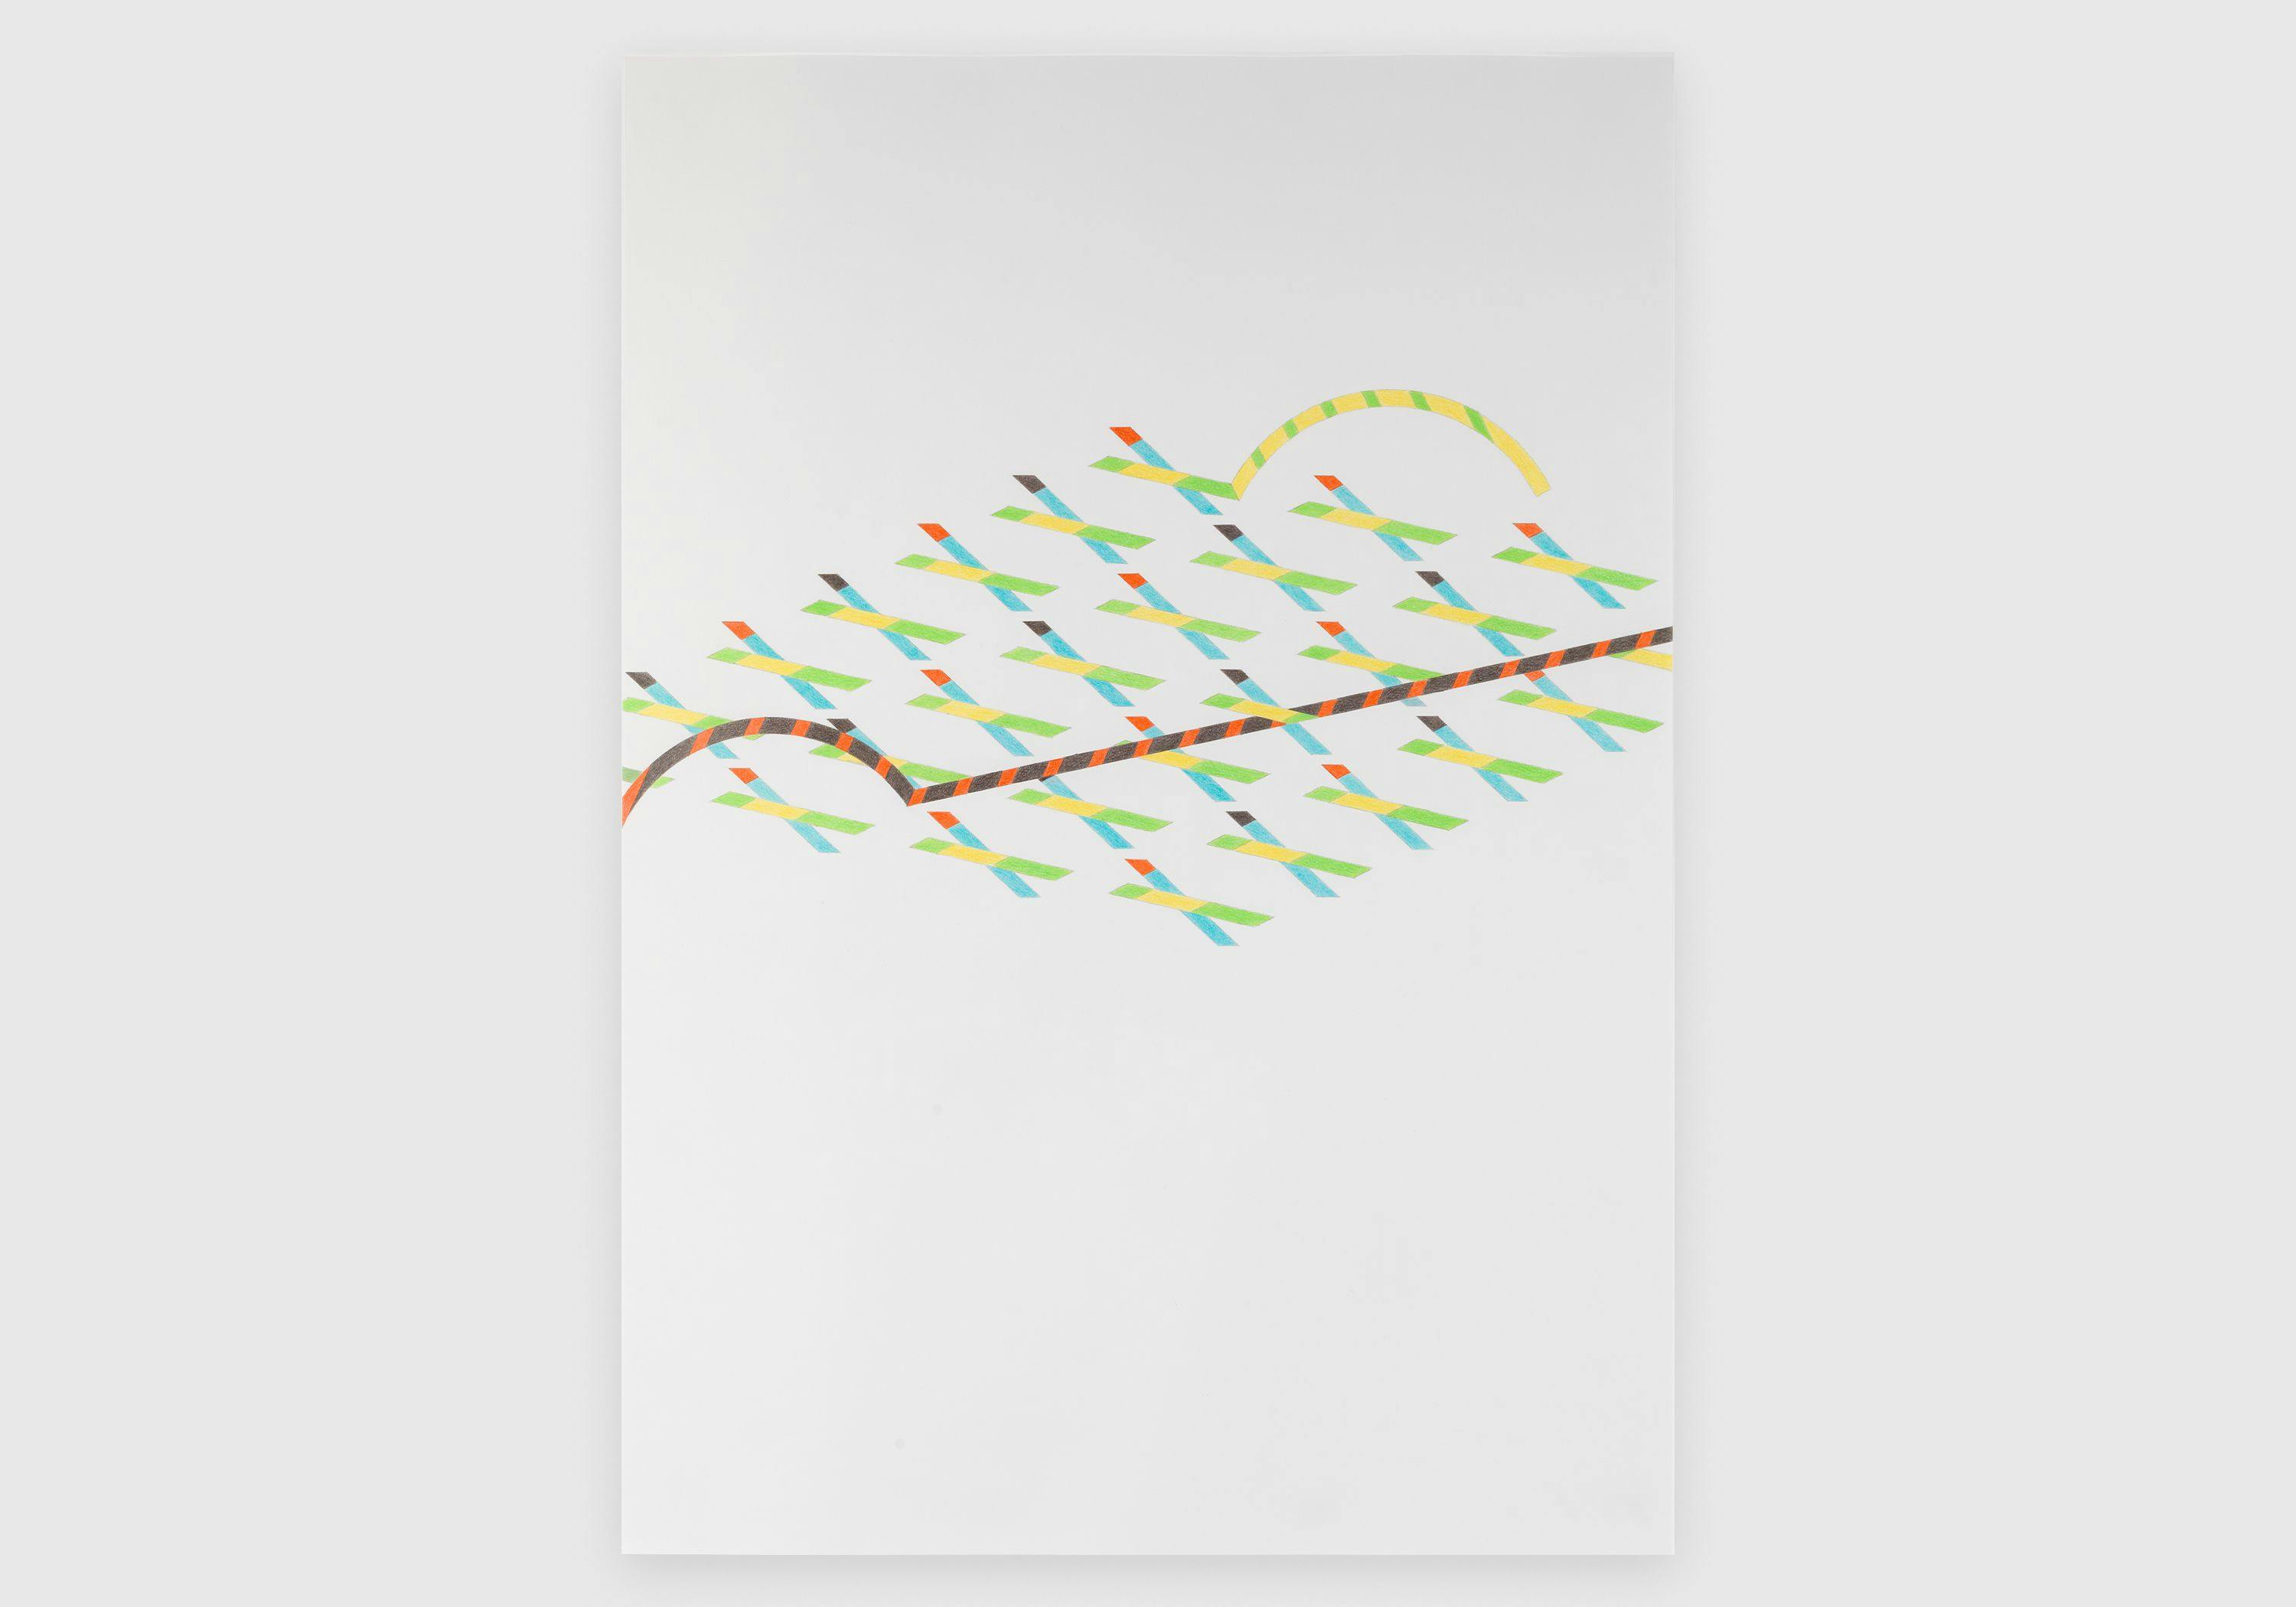 A drawing by Tomma Abts, called Untitled #5, dated 2013.